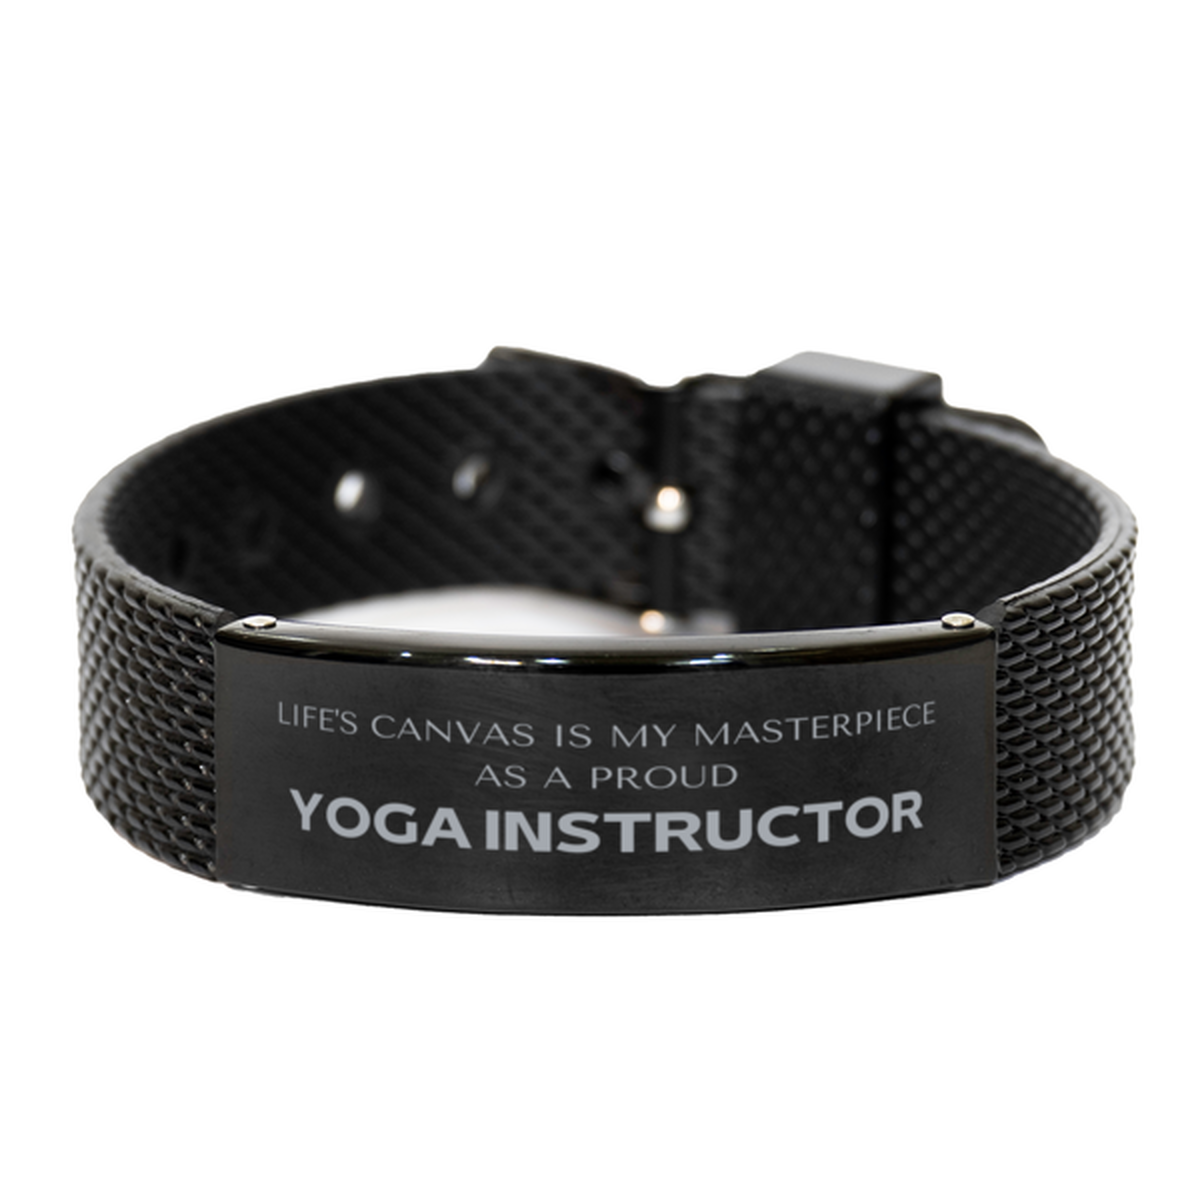 Proud Yoga Instructor Gifts, Life's canvas is my masterpiece, Epic Birthday Christmas Unique Black Shark Mesh Bracelet For Yoga Instructor, Coworkers, Men, Women, Friends